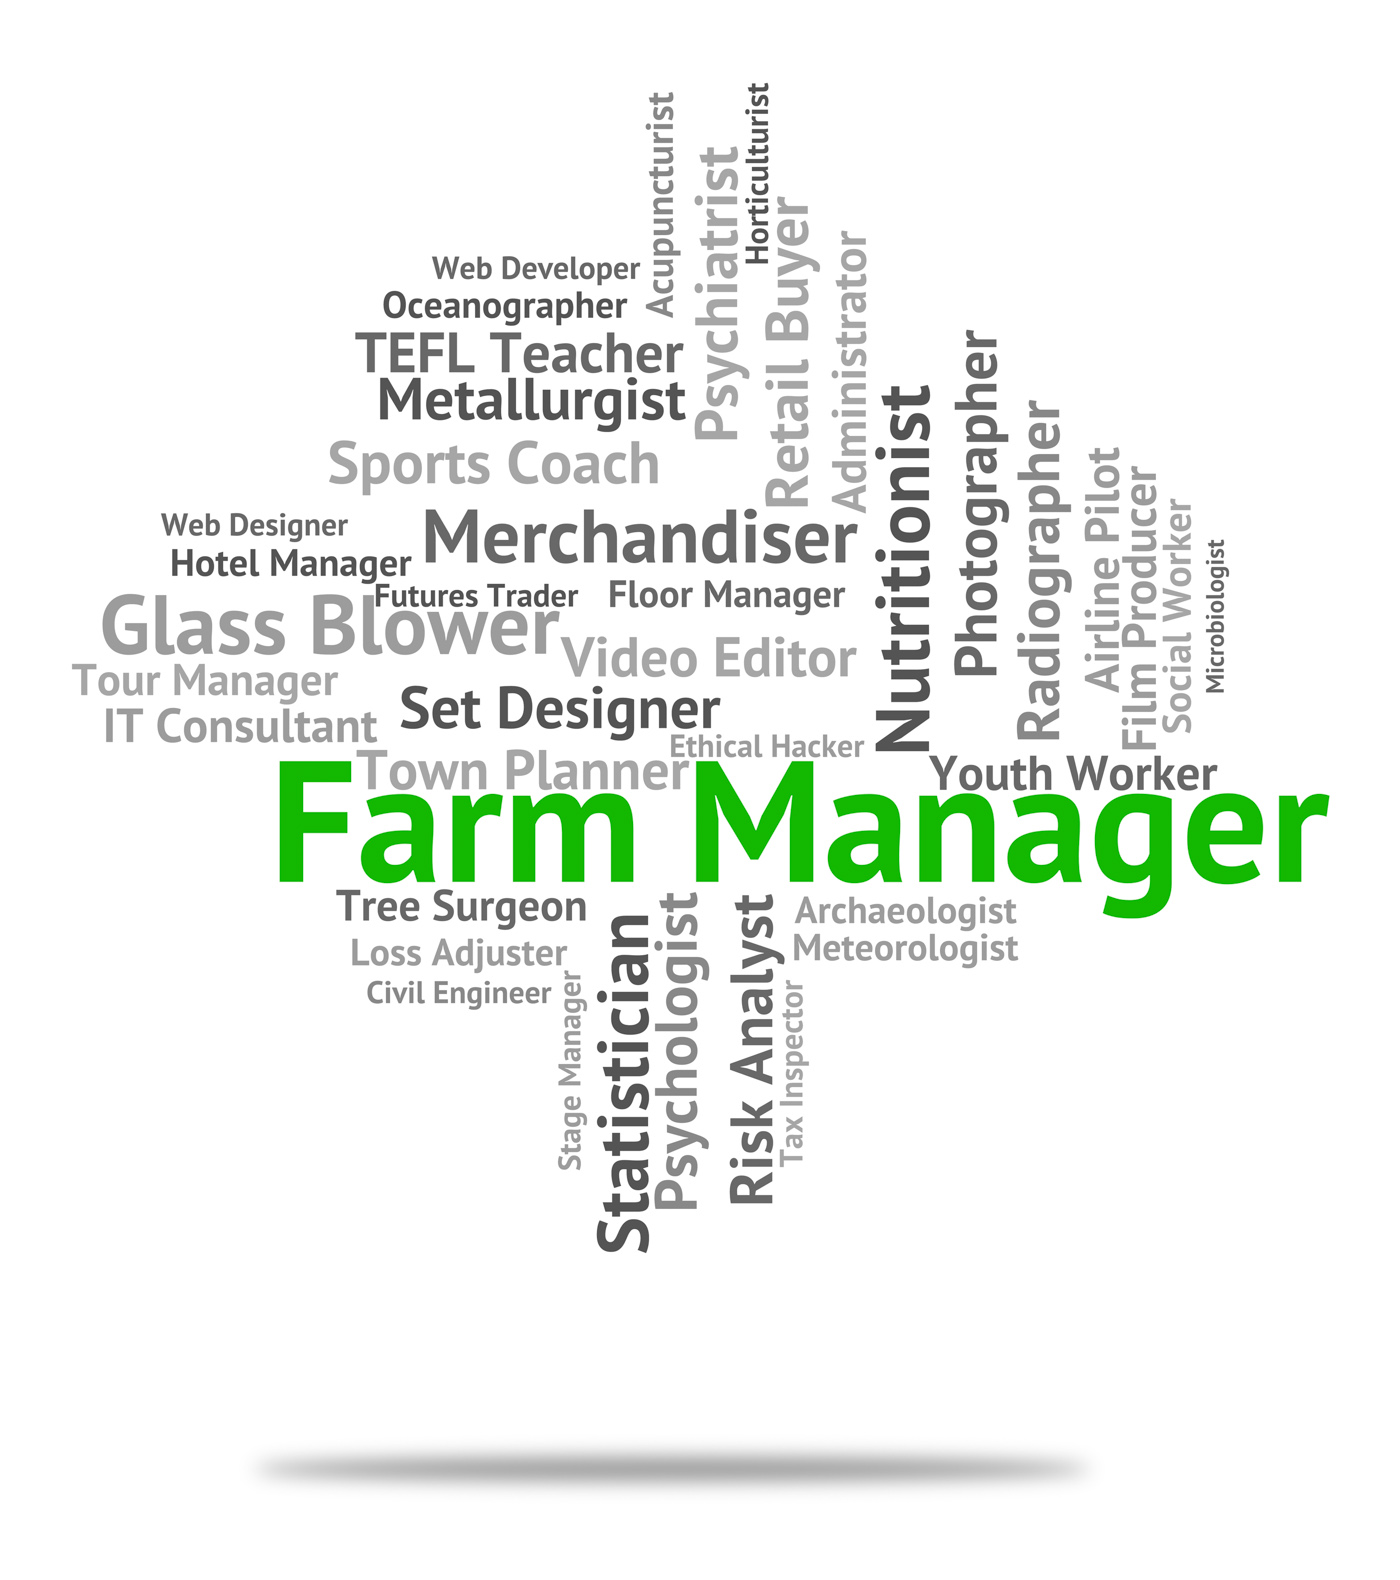 Farm manager means farmed supervisor and employee photo